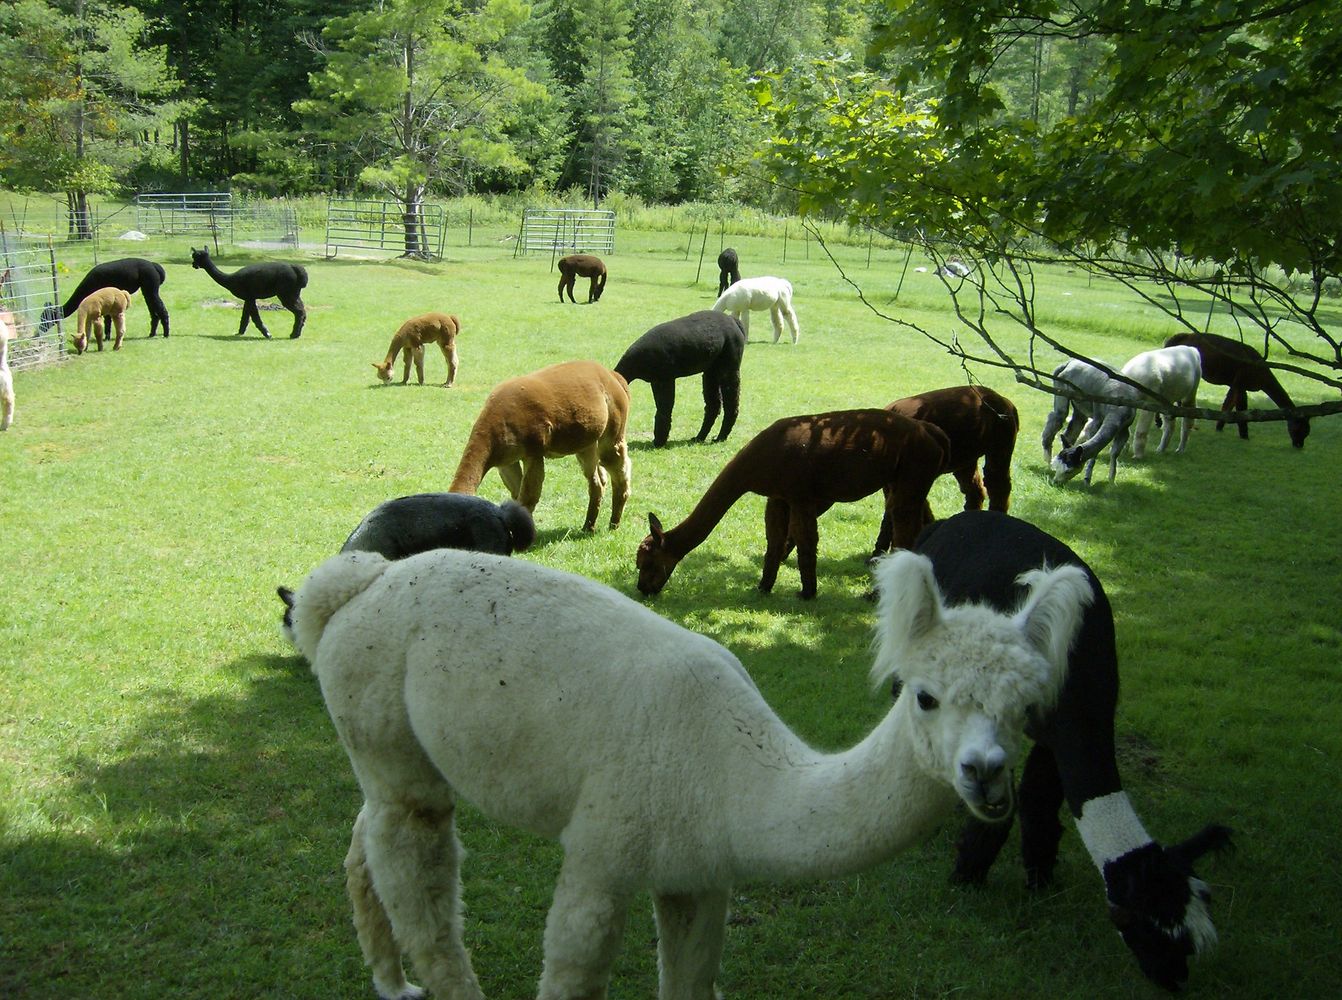 We have handcrafted fiber, yarn, roving, raw fleece, and many other products. You may pet animals